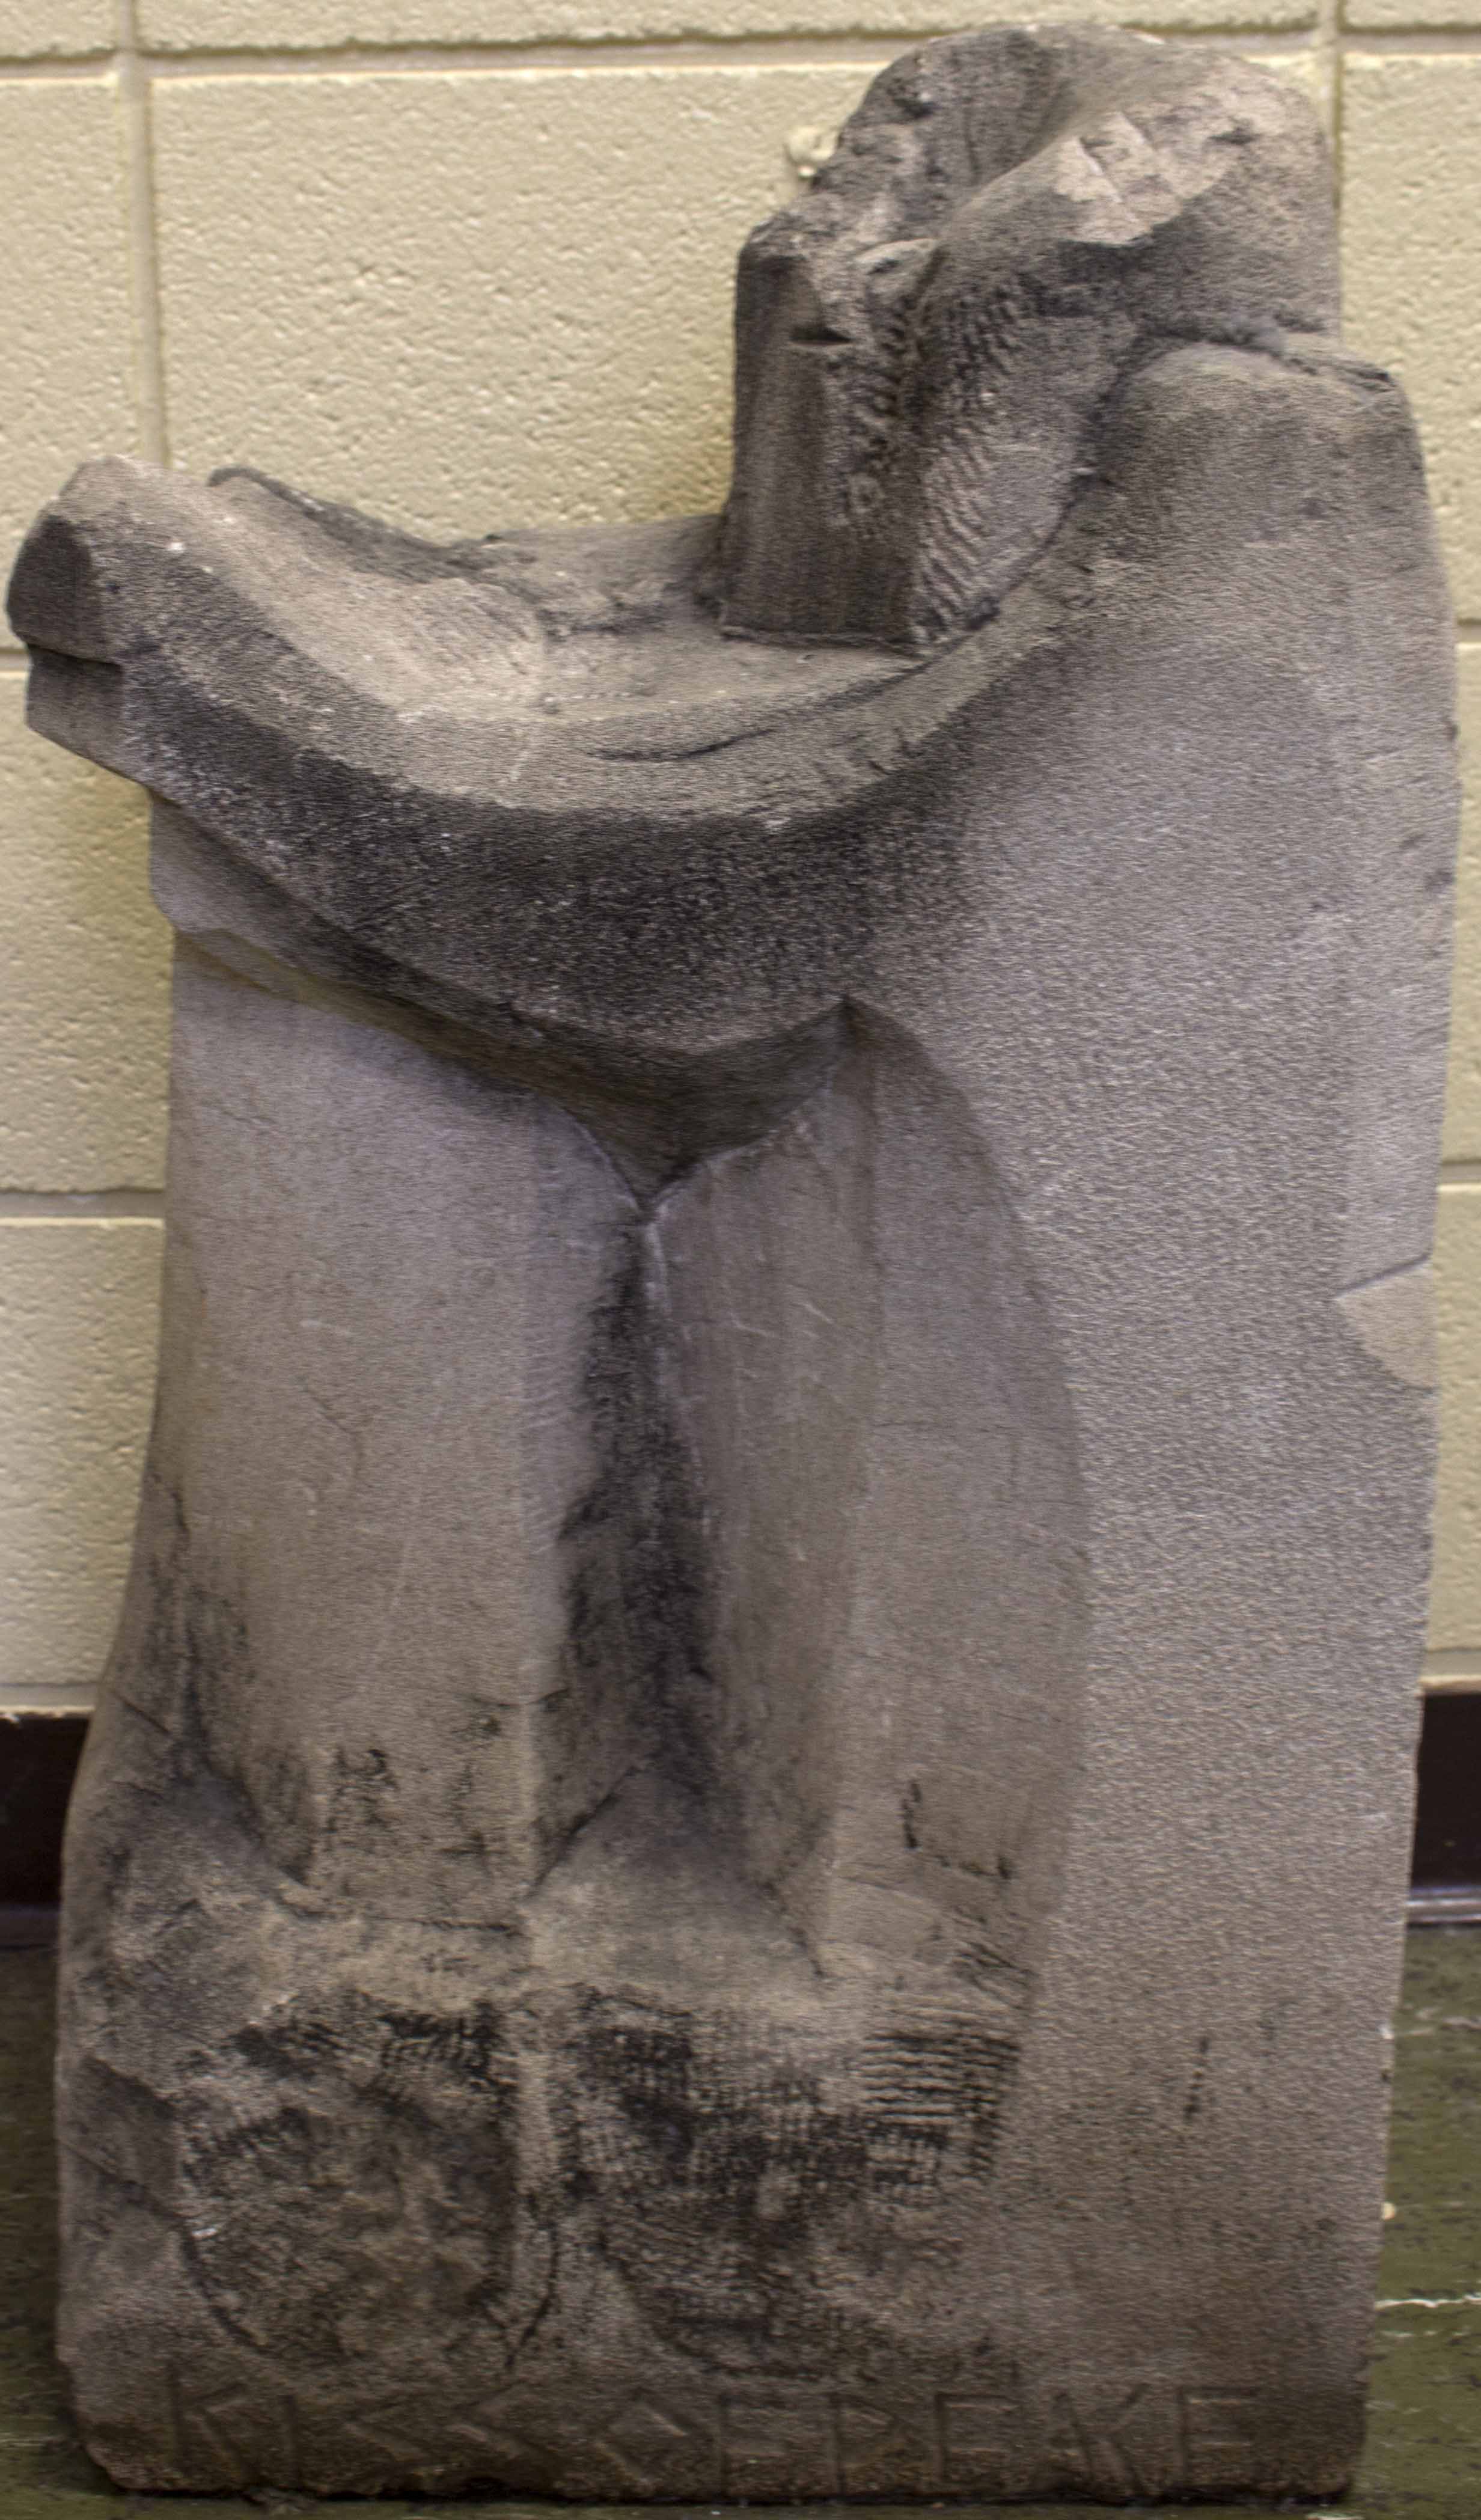 Carved concrete sculpture of a figure with arms extended to the left. At the bottom of the sculpture, it has "KISS OF PEACE" carved. 